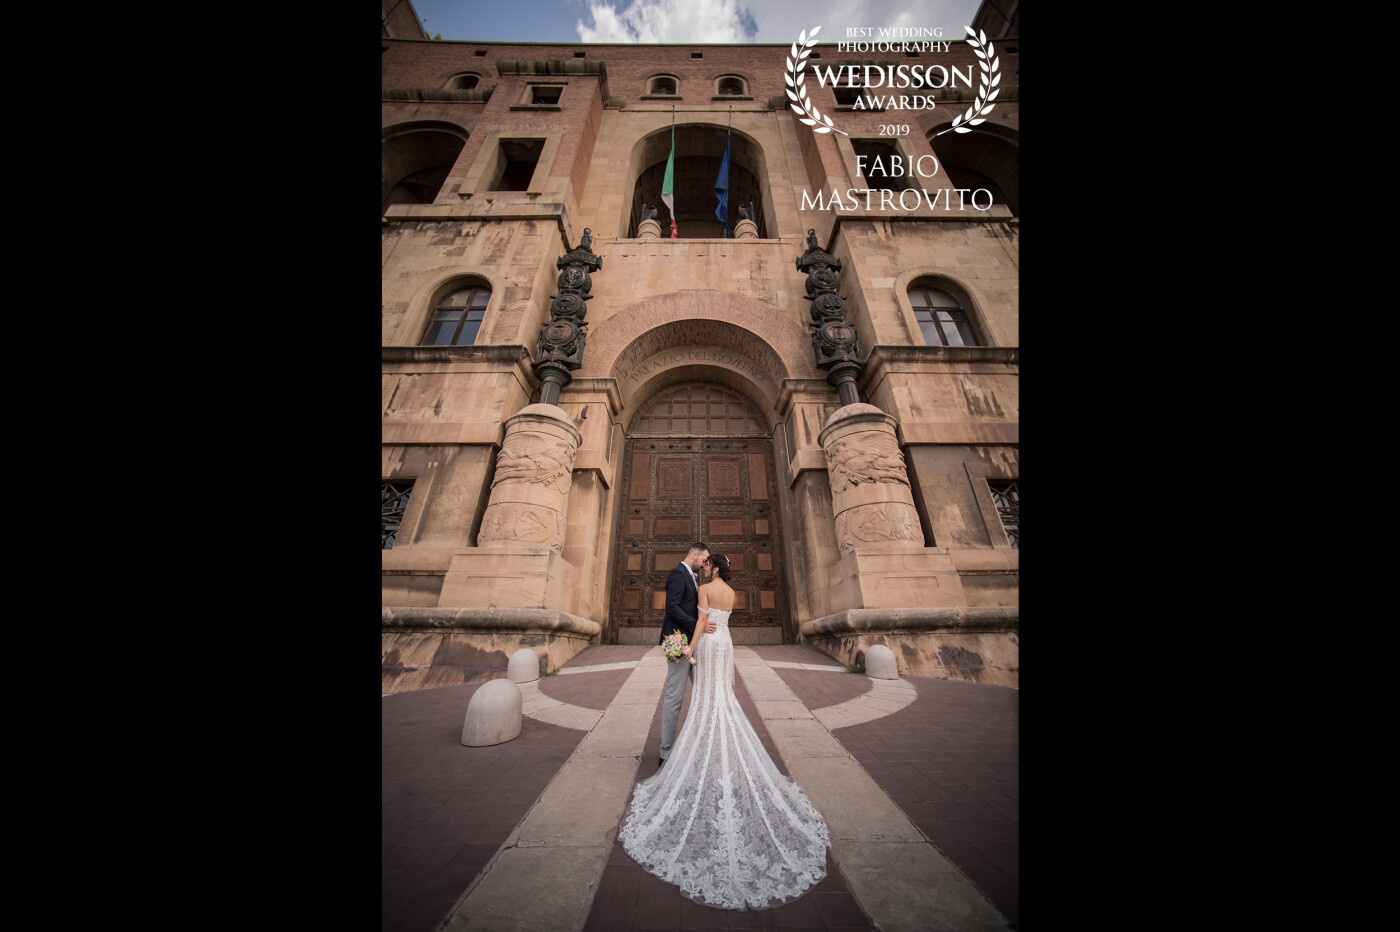 In the splendid setting of an ancient palace built during the Second World War.<br />
Symmetry and natural colors of a shot taken with a 14mm fixed lens. Give the viewer the grandeur of marriage.